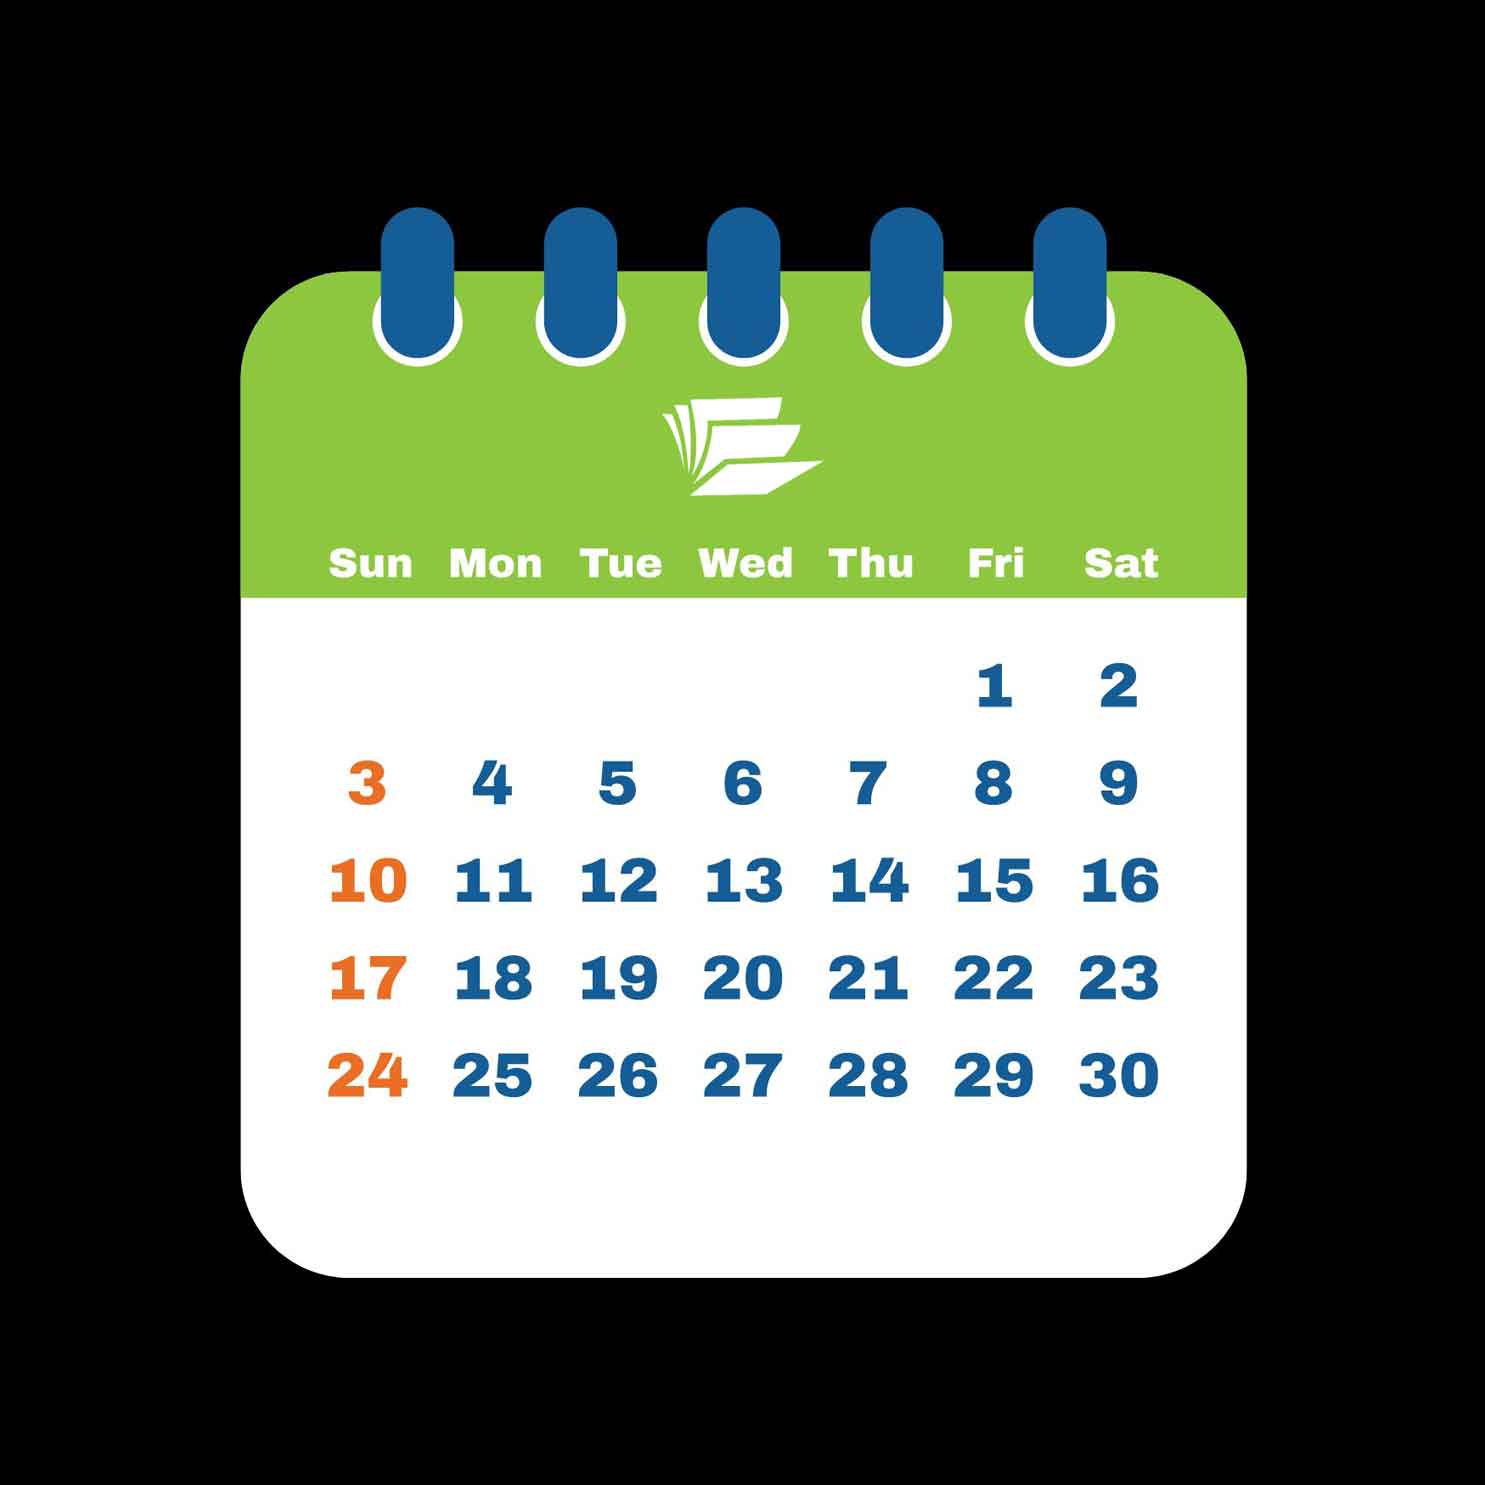 Check out our calendar for even more events!